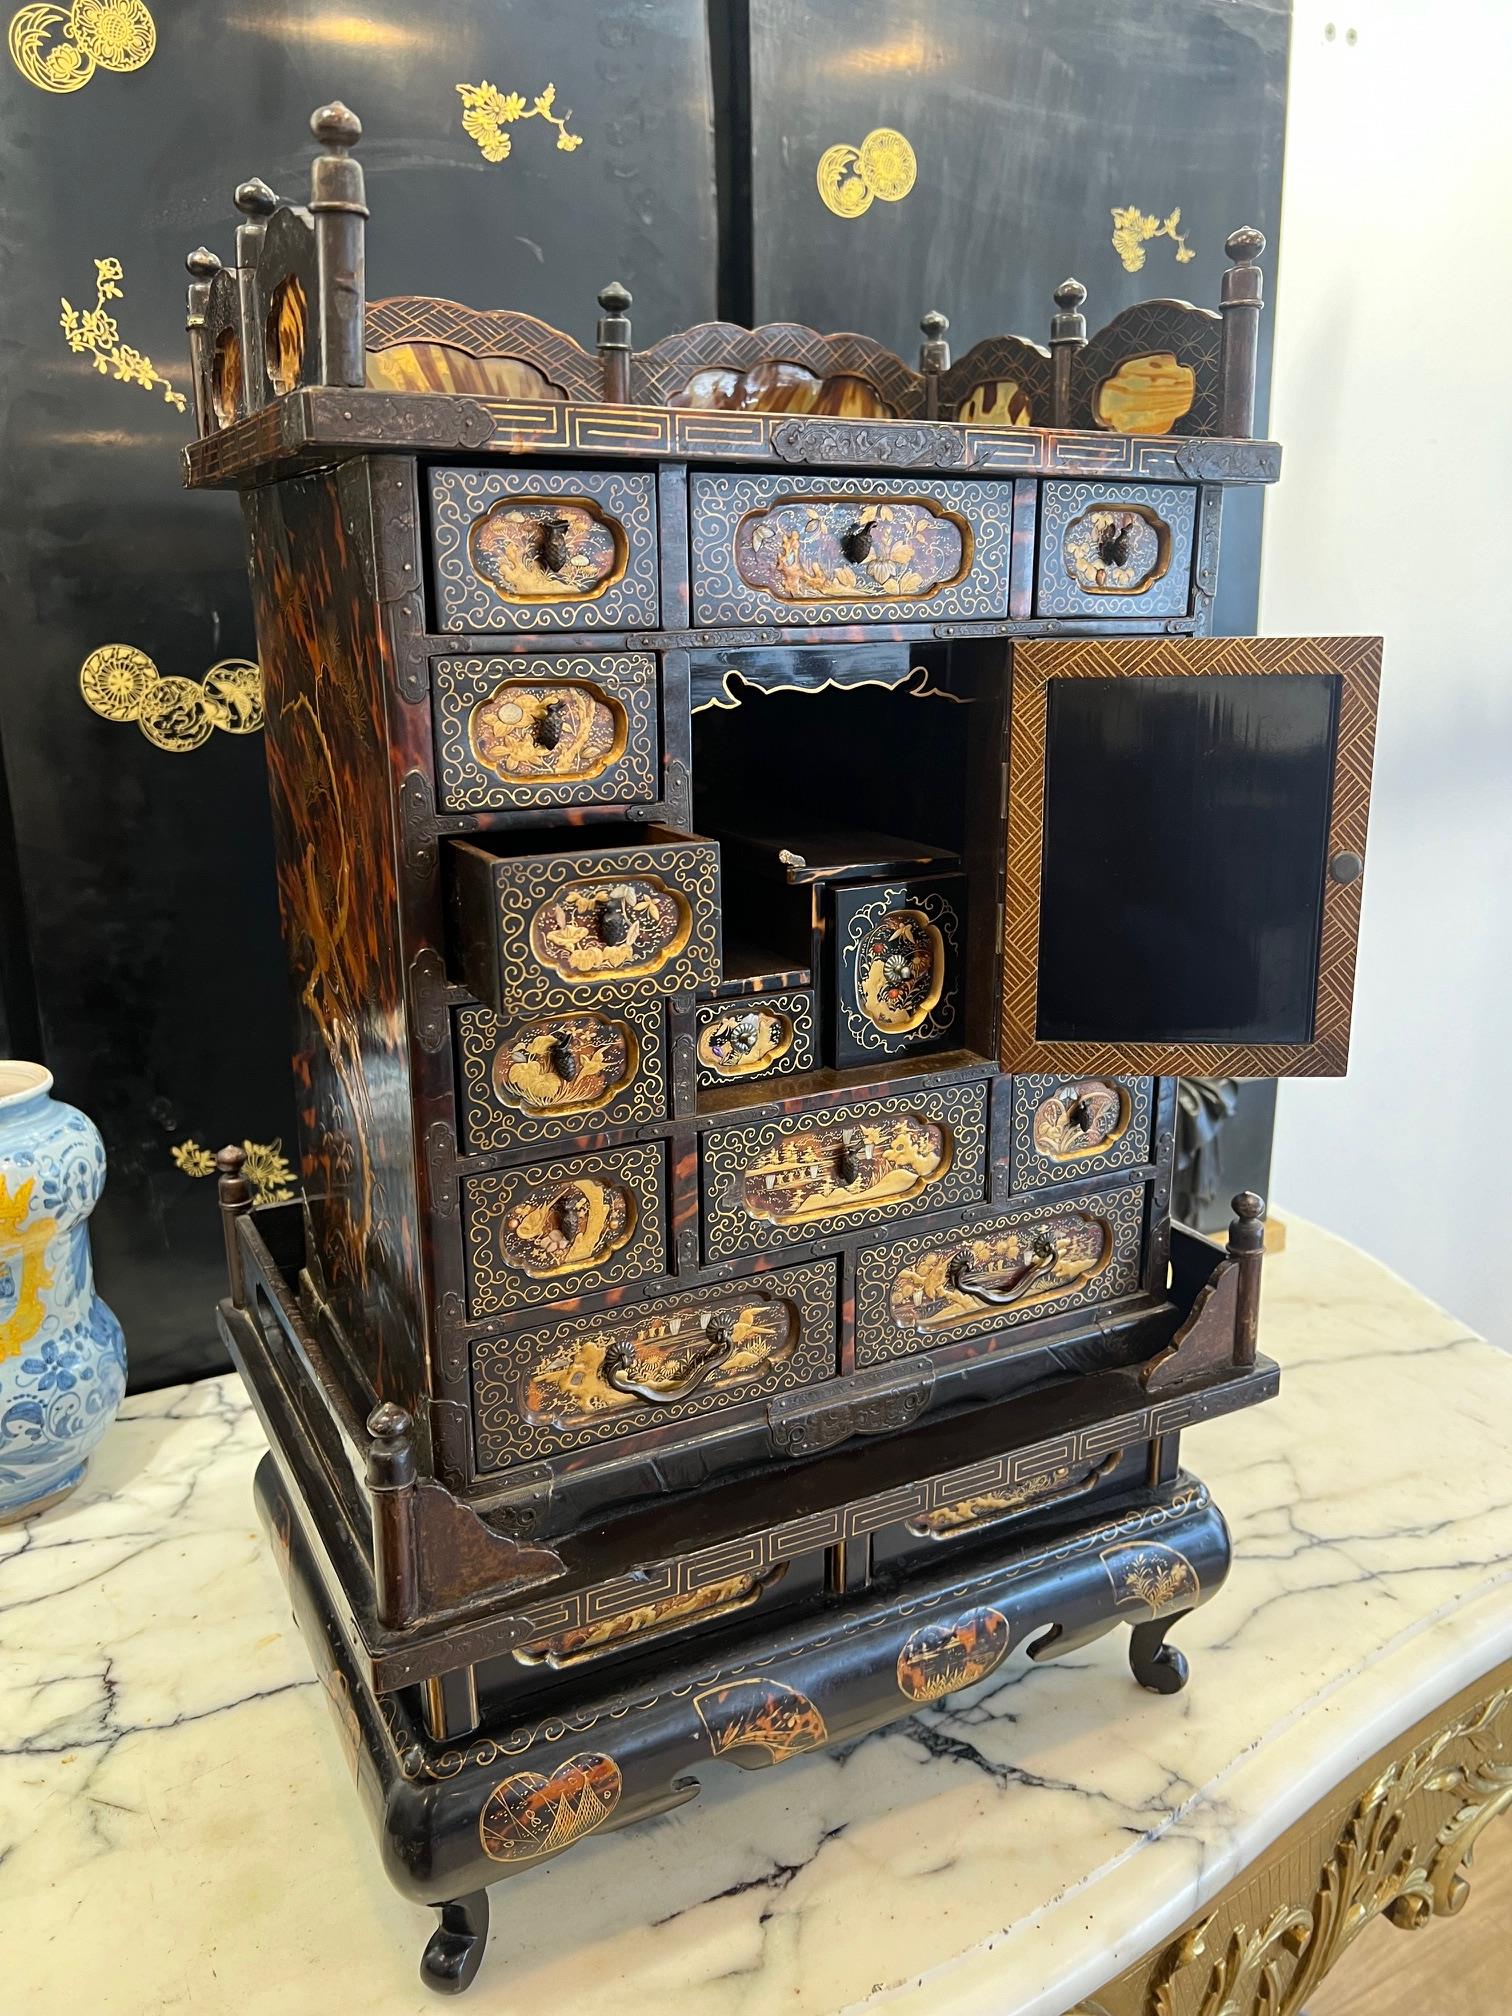 A FINE LATE 19TH CENTURY JAPANESE TORTOISESHELL, LACQUER AND GOLD TABLE CABINET - Image 11 of 12